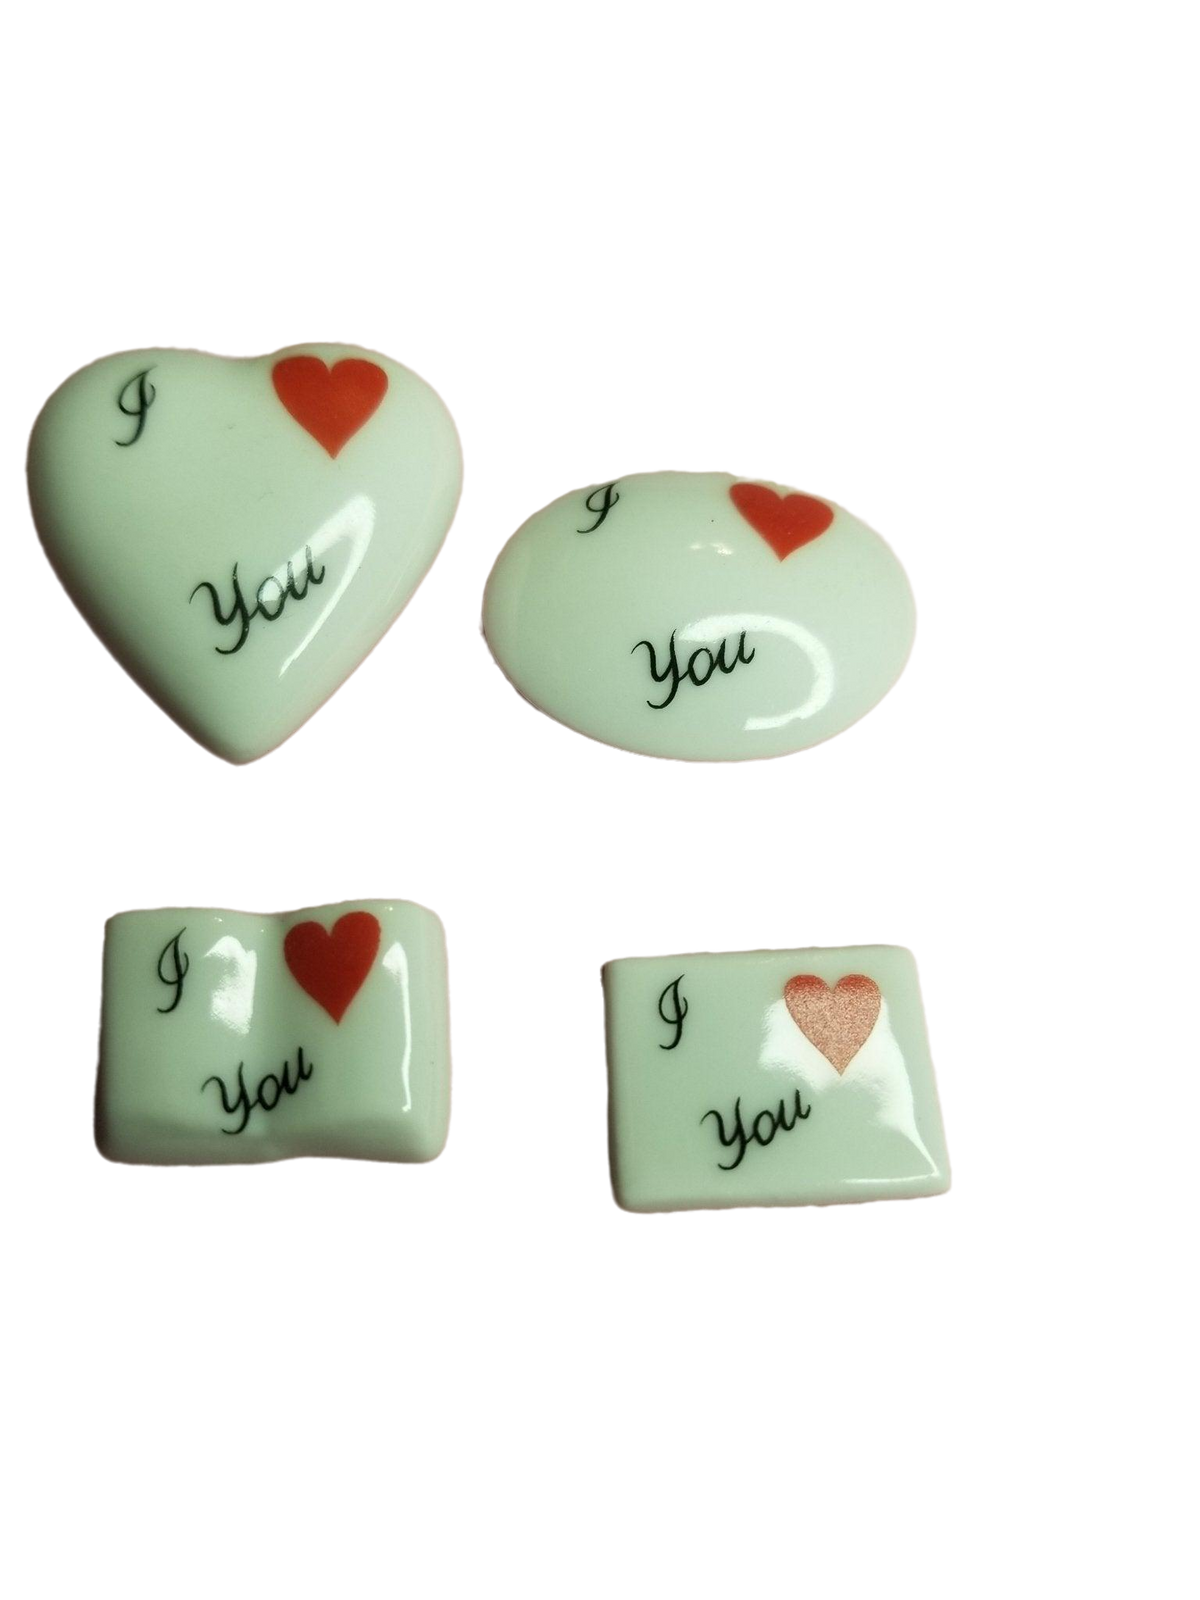 I LOVE You - Goodie is a delightful product featuring a heart-shaped design with the words 'I LOVE You' written in elegant script, perfect for expressing affection and appreciation